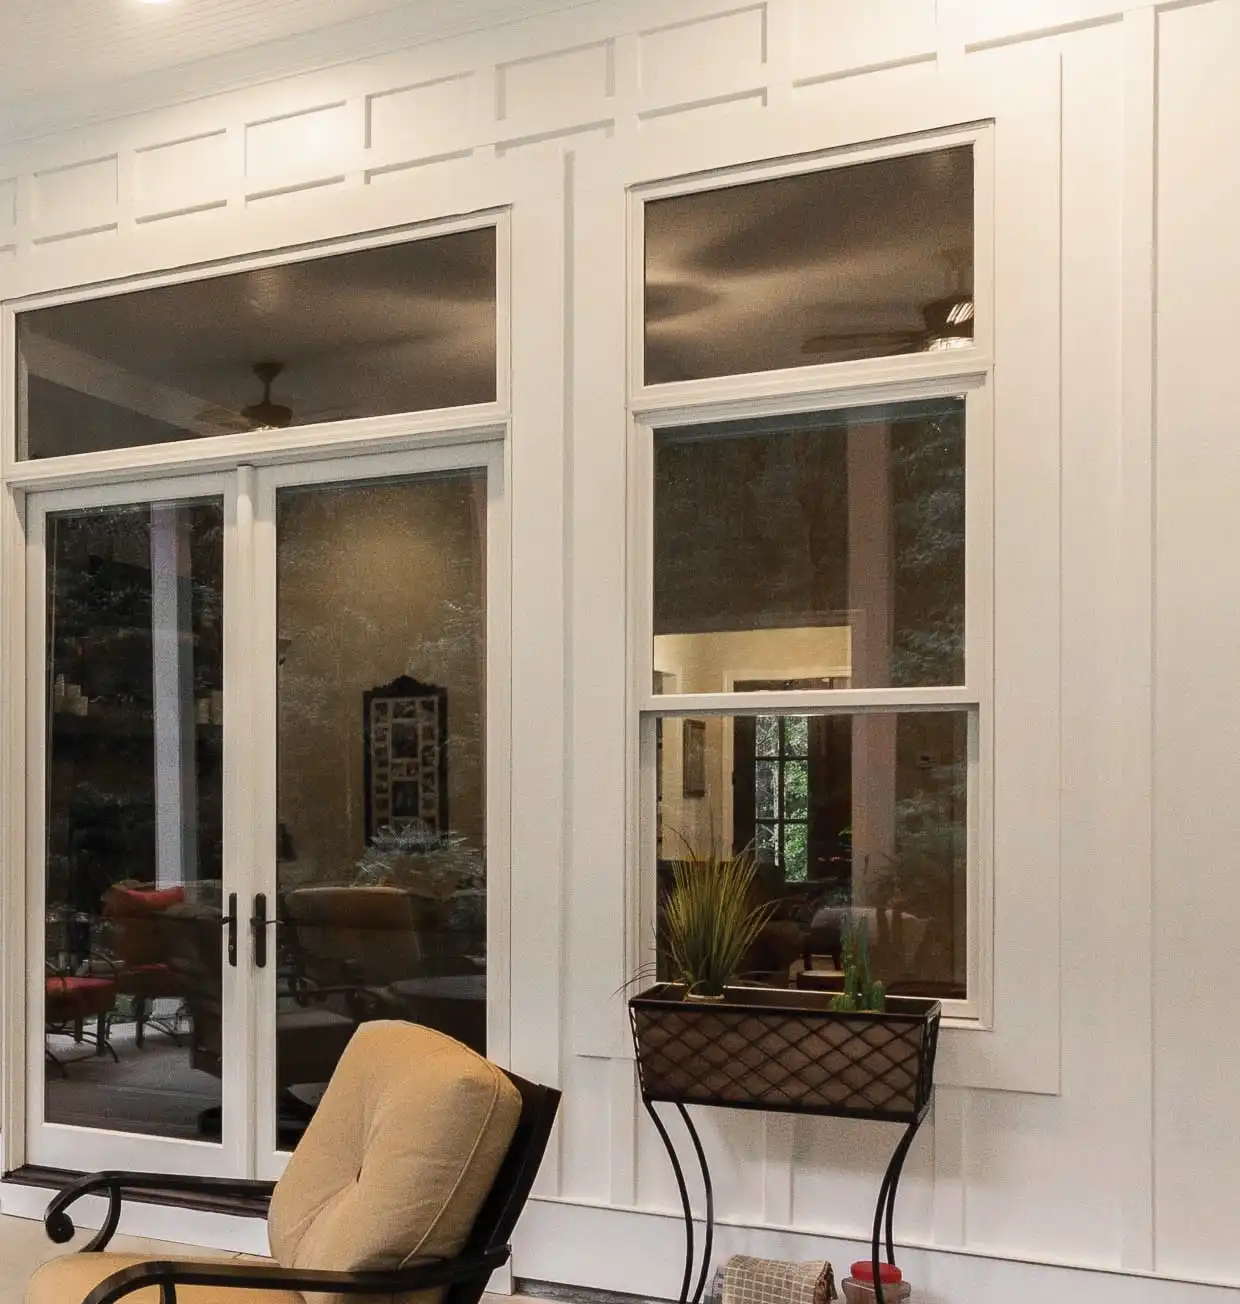 Exterior view of a white Marvin Replacement Double Hung window next two a two-panel French door.